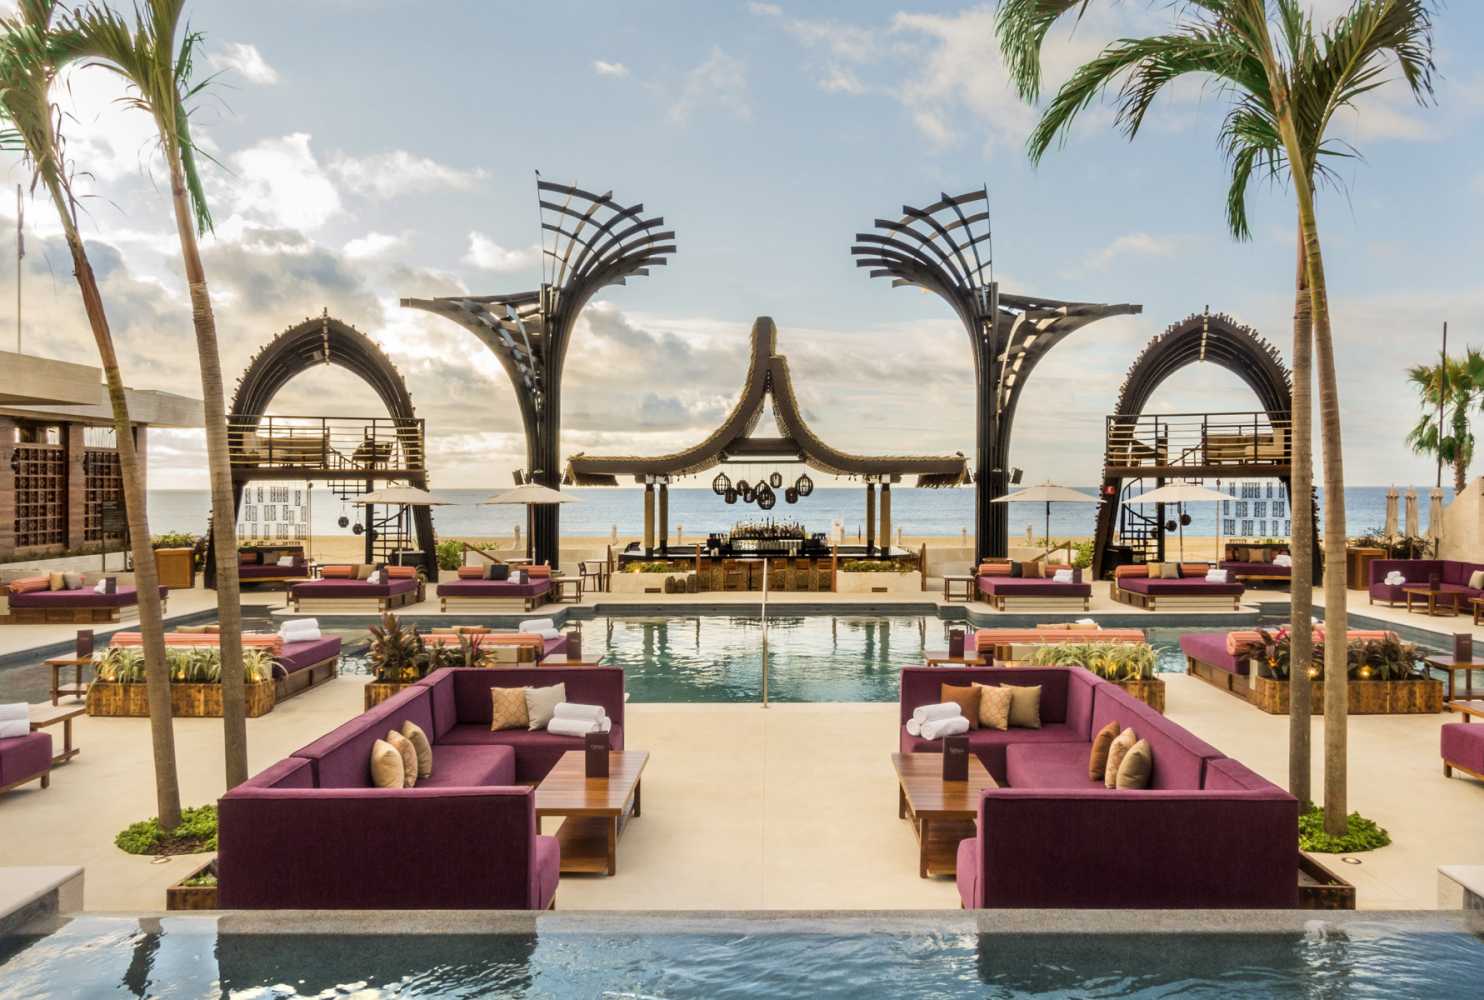 The resort includes four new venues - Omnia Dayclub and three restaurants